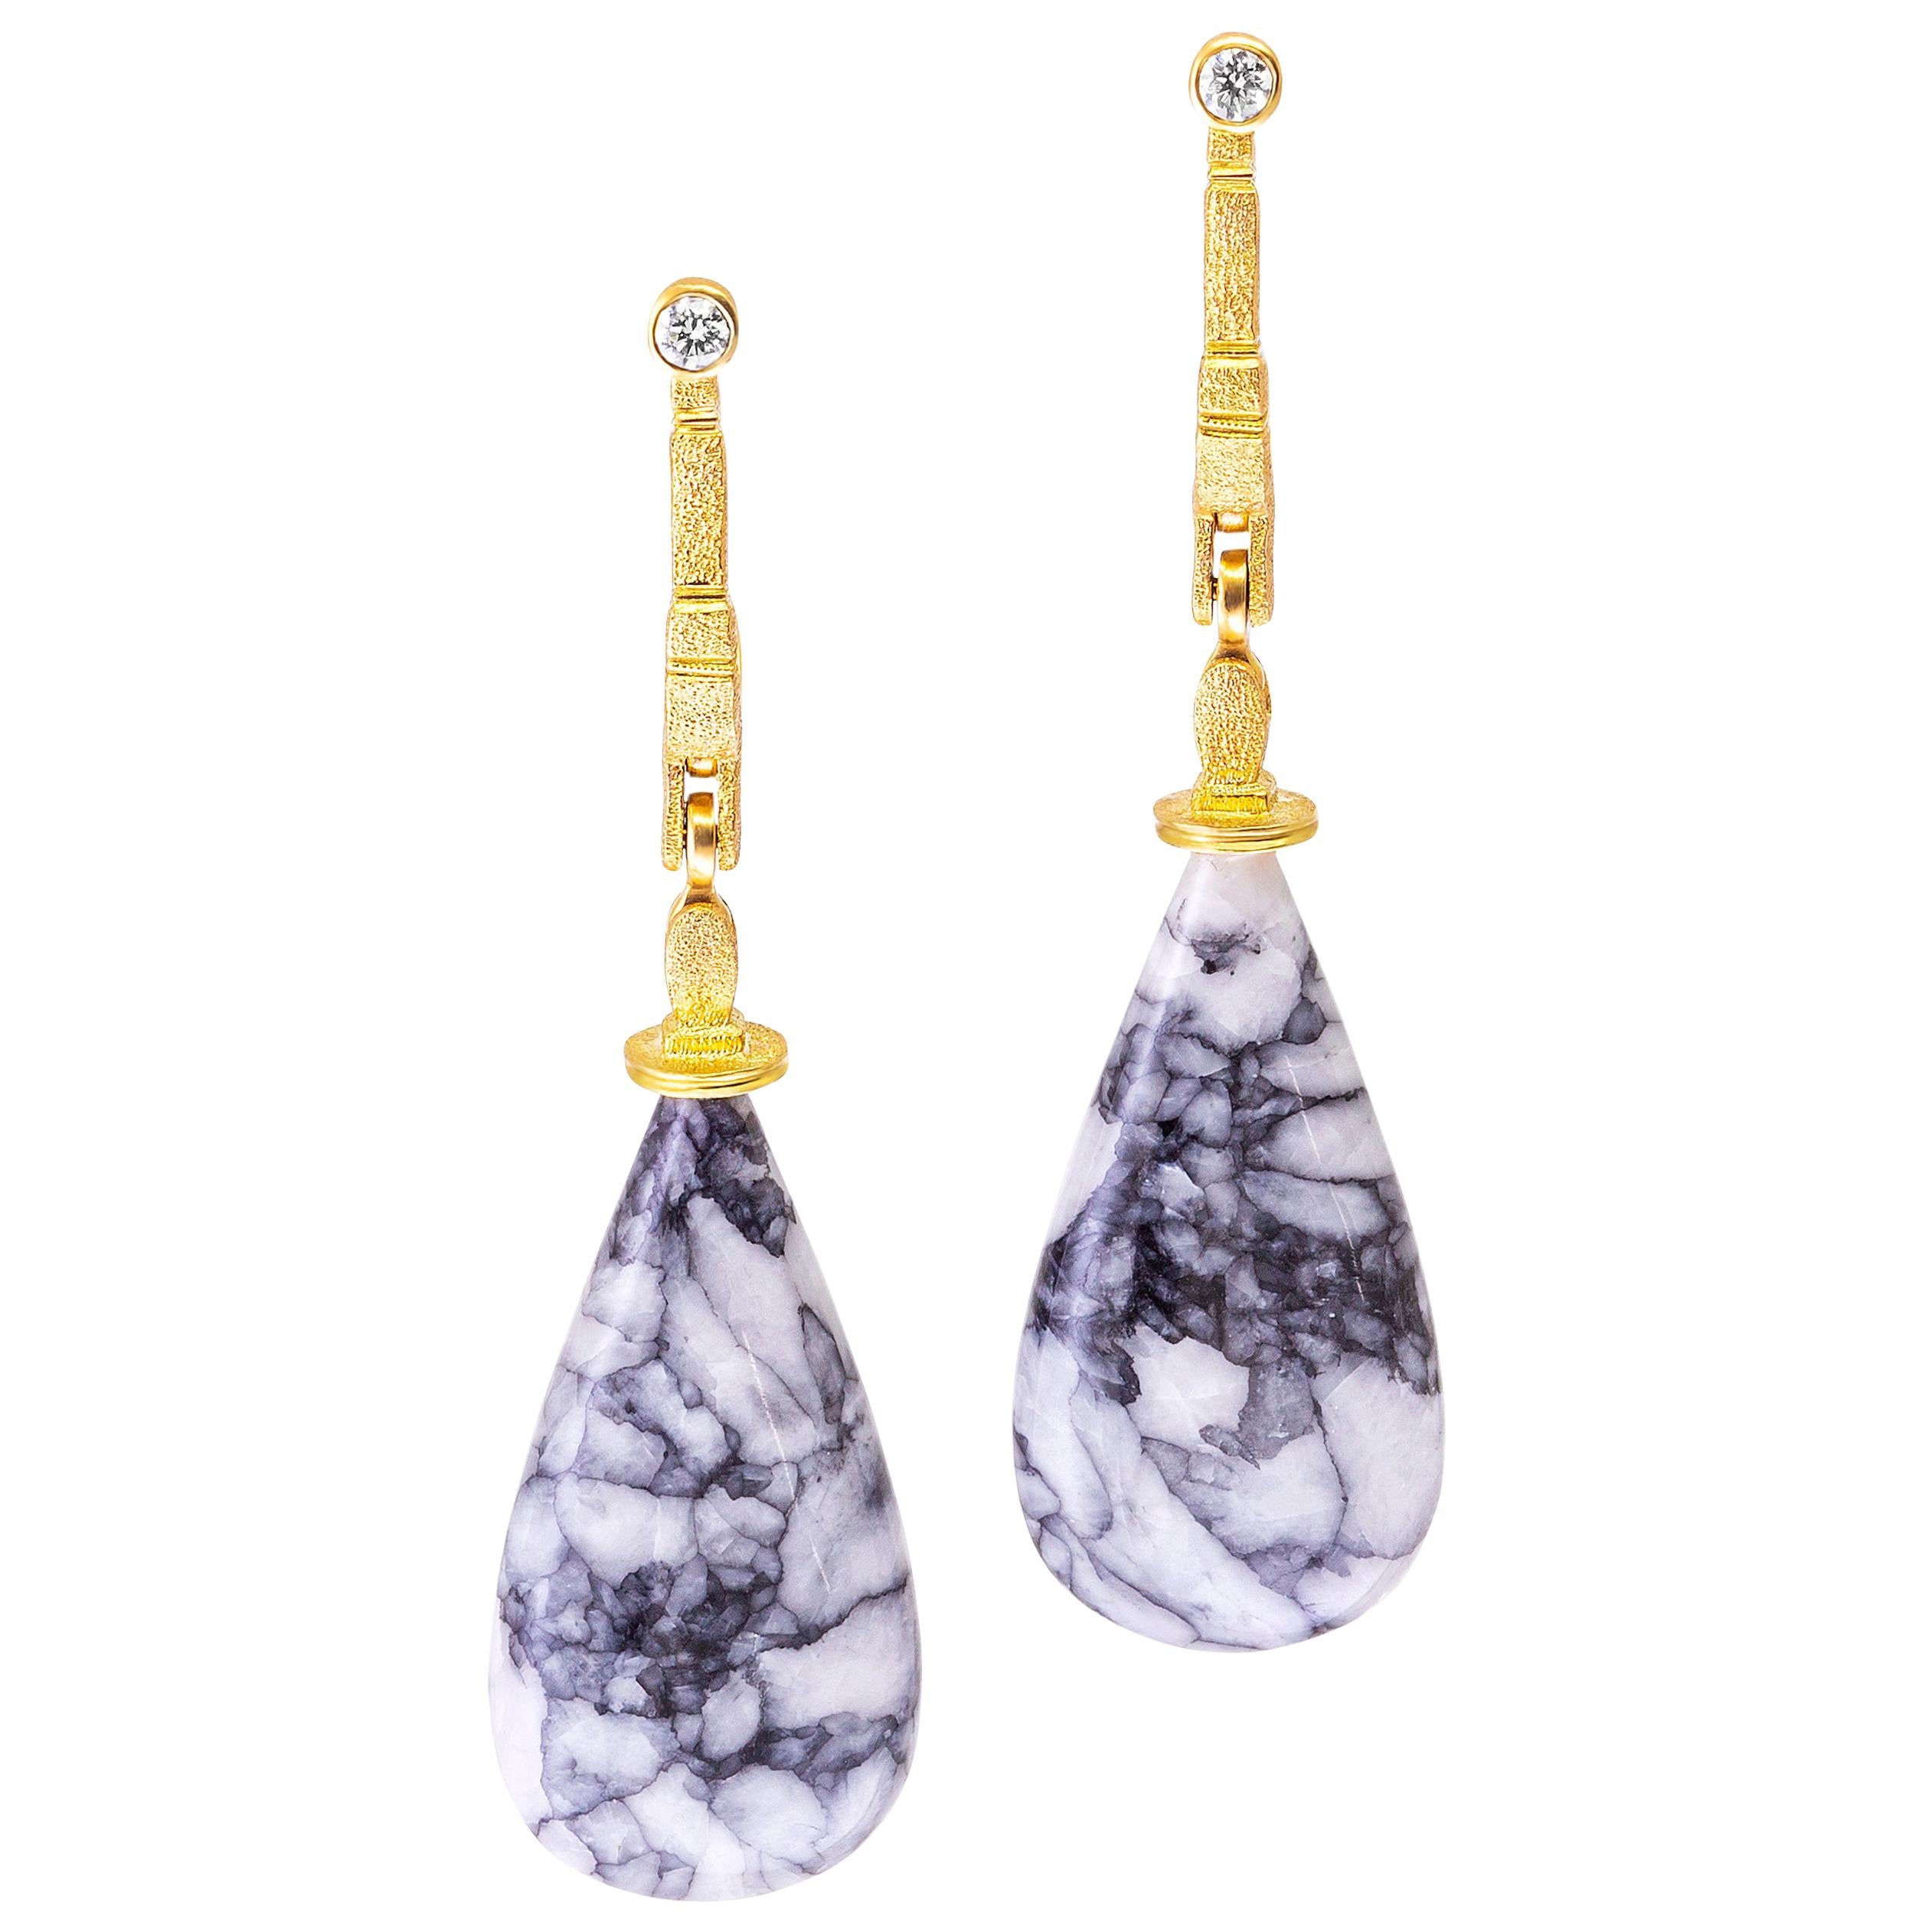 Alex Sepkus 18 Karat Yellow Gold Sticks and Stones Earrings with Pinolite Drops For Sale